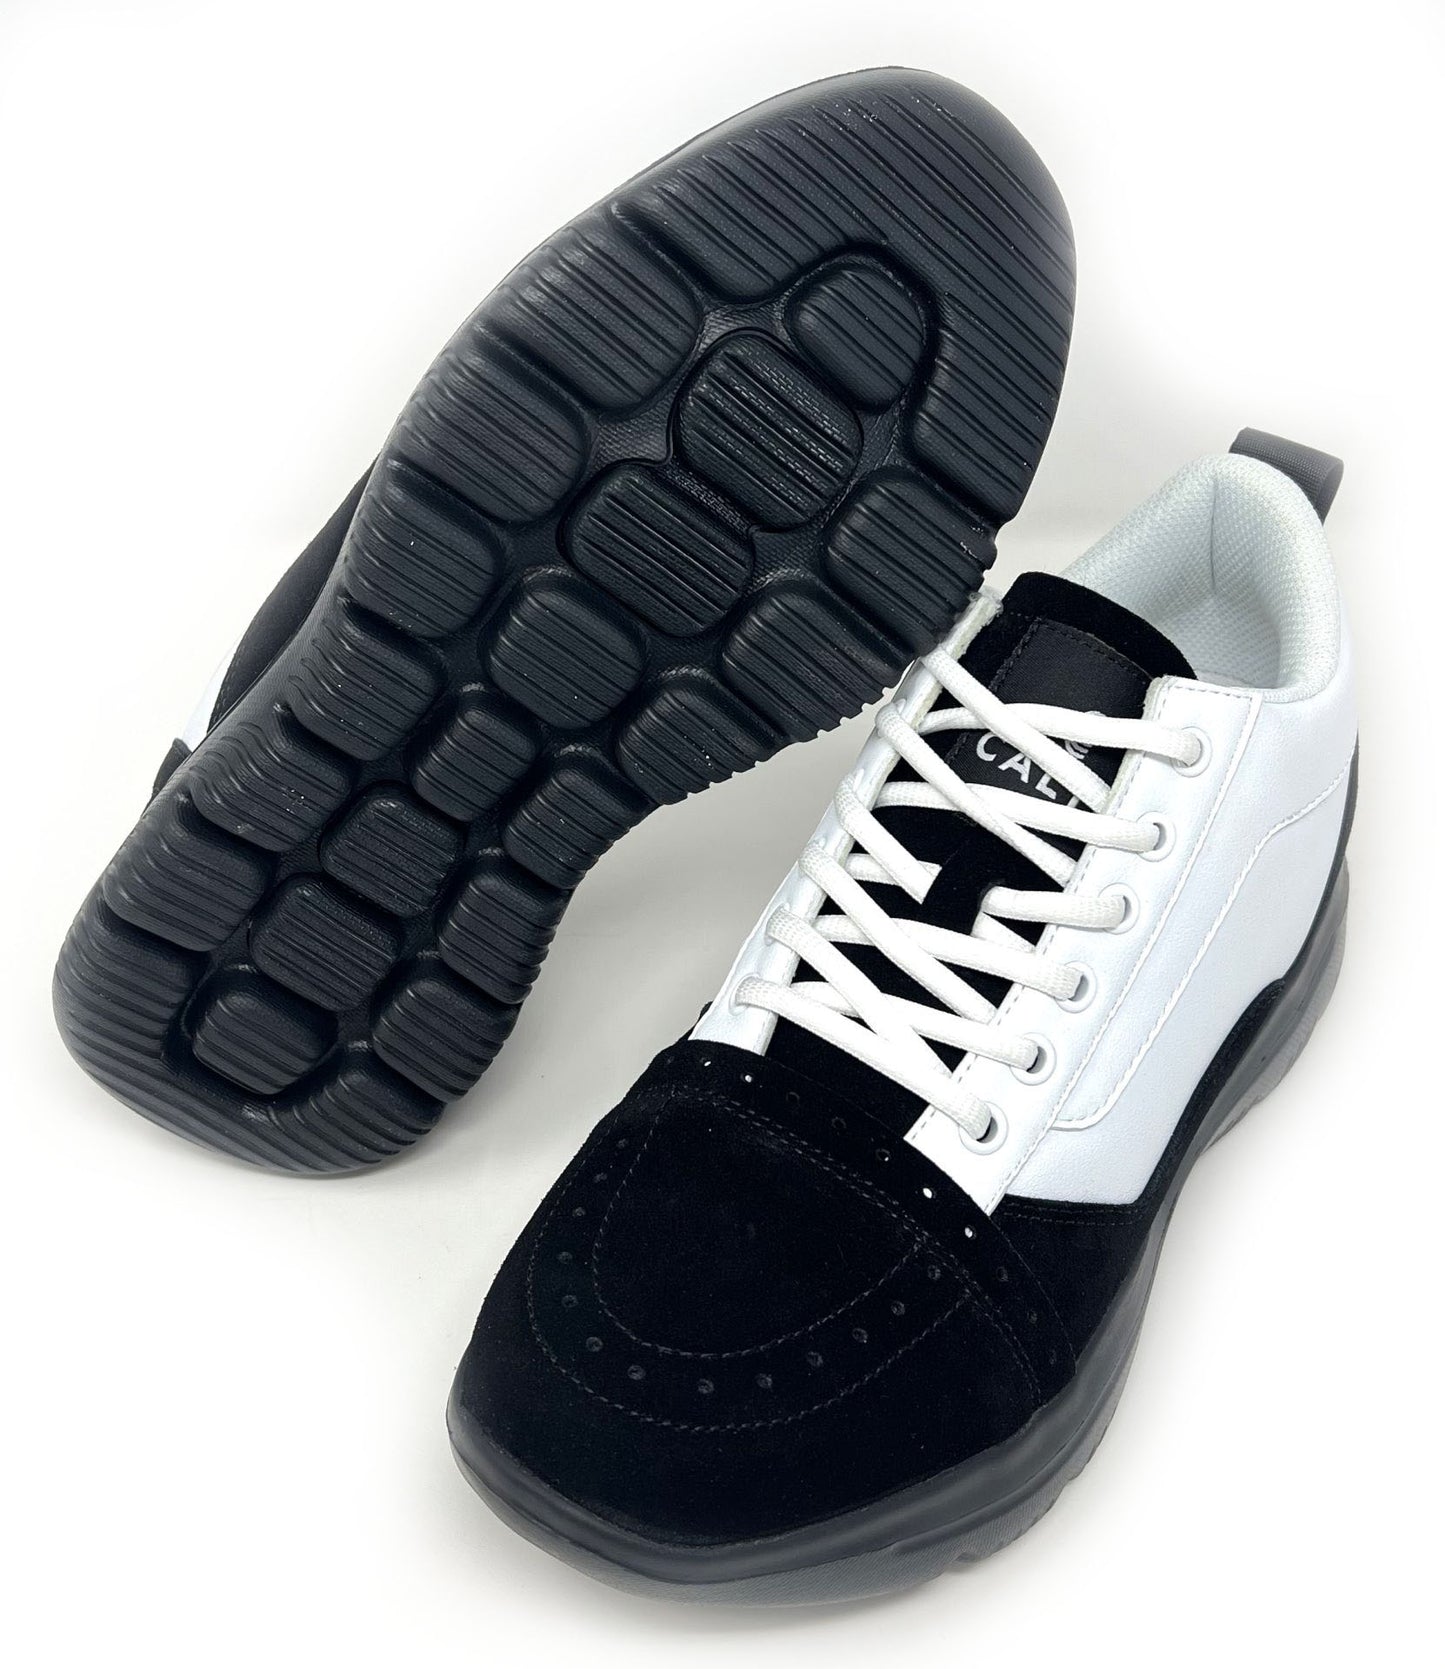 Elevator shoes height increase FSG0041 - 2.8 Inches Taller (Black/White) - Size 7.5 Only